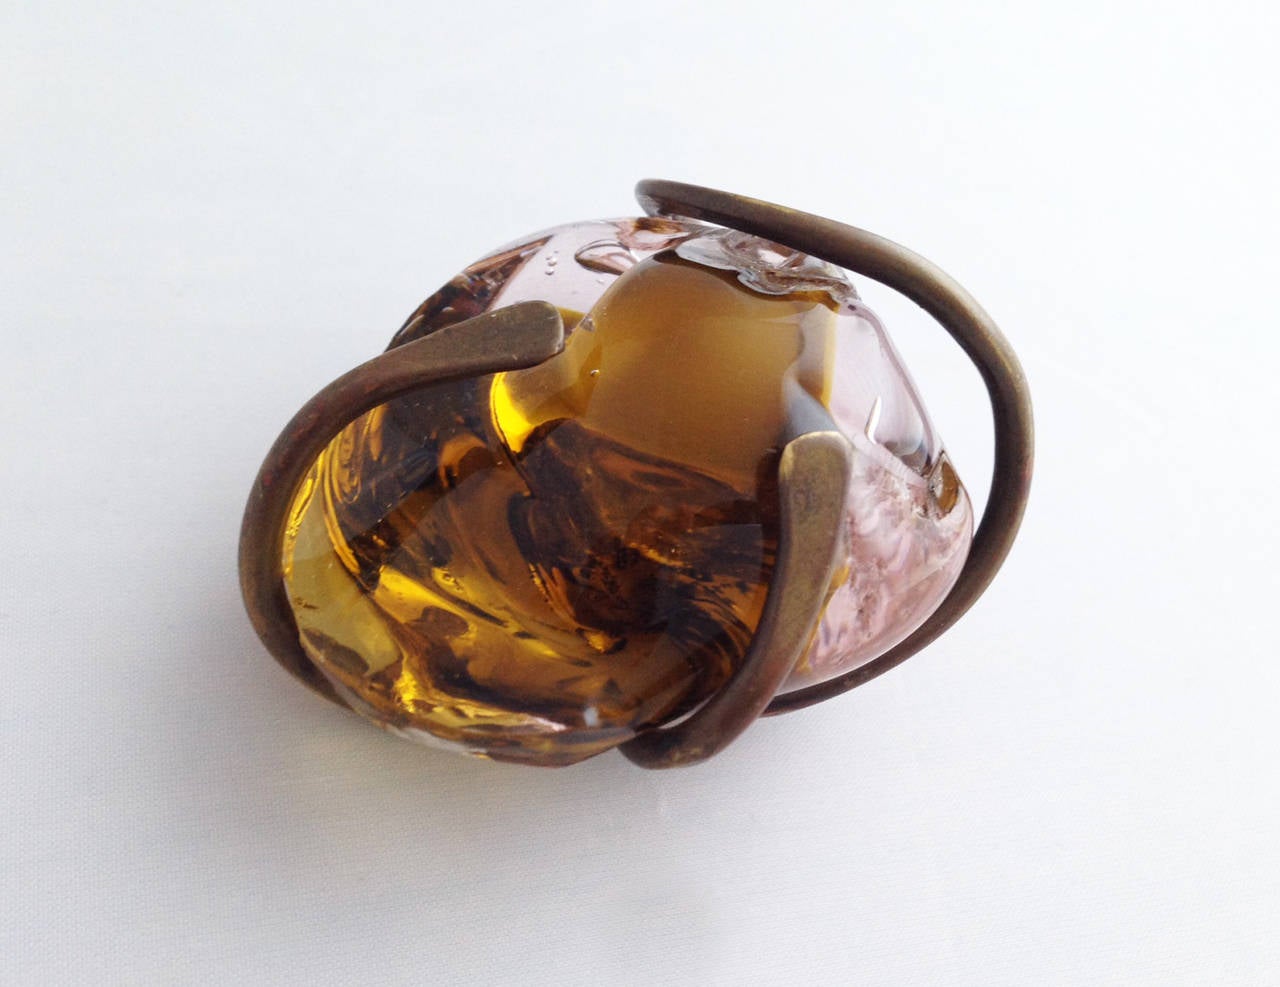 A rare, handmade bronze and hand blown glass pendant created by sculptor Claire Falkenstein of Venice, California.  Unconventional pendant is large, measuring 2 5/8